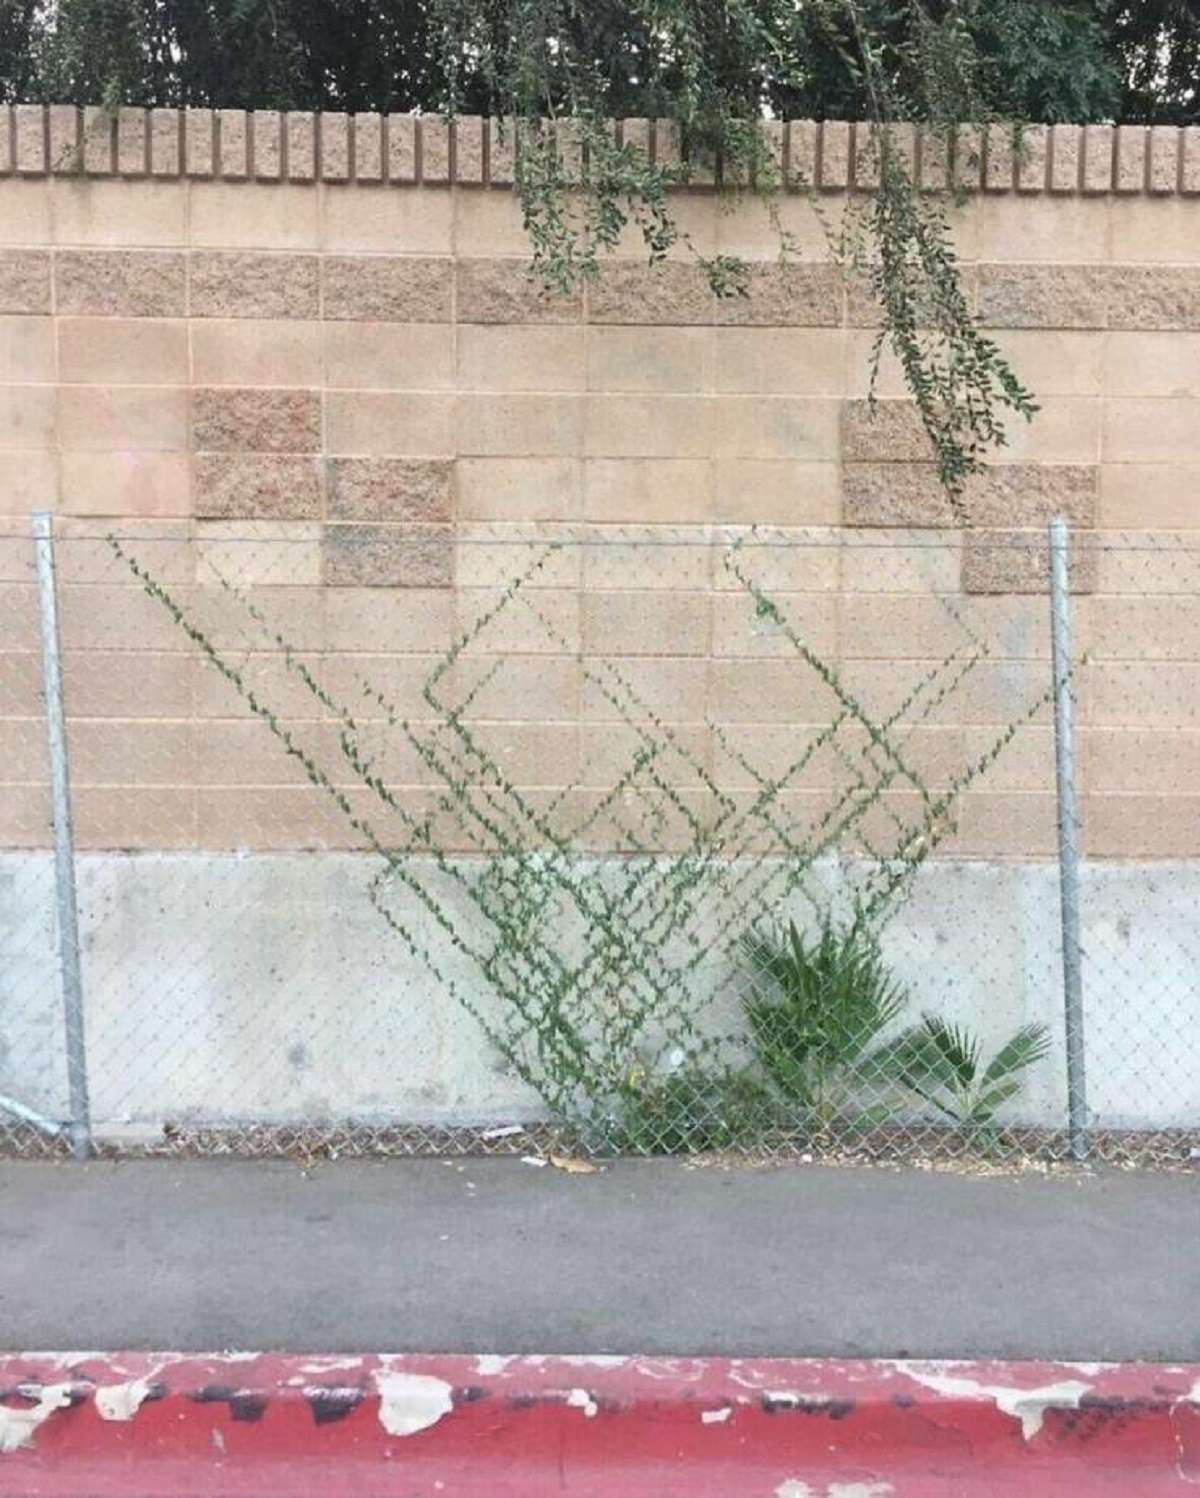 "This Plant Is Growing Along The Chains Of A Fence"